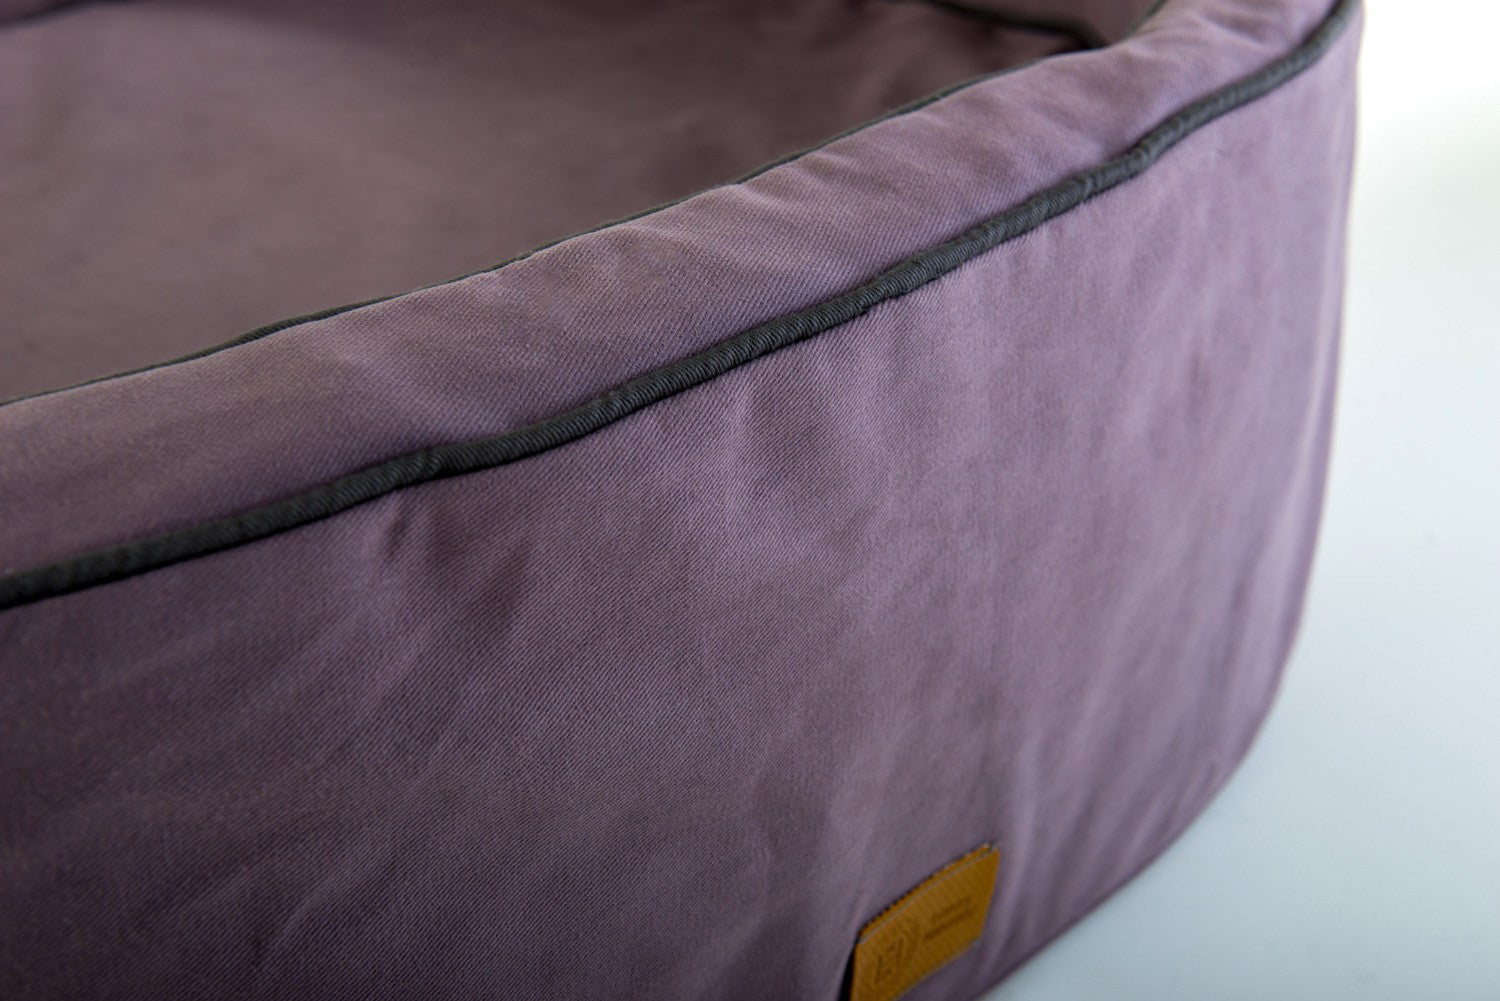 Mauve bull denim cotton natural all season Nest dog bed made from organic materials in Britain.